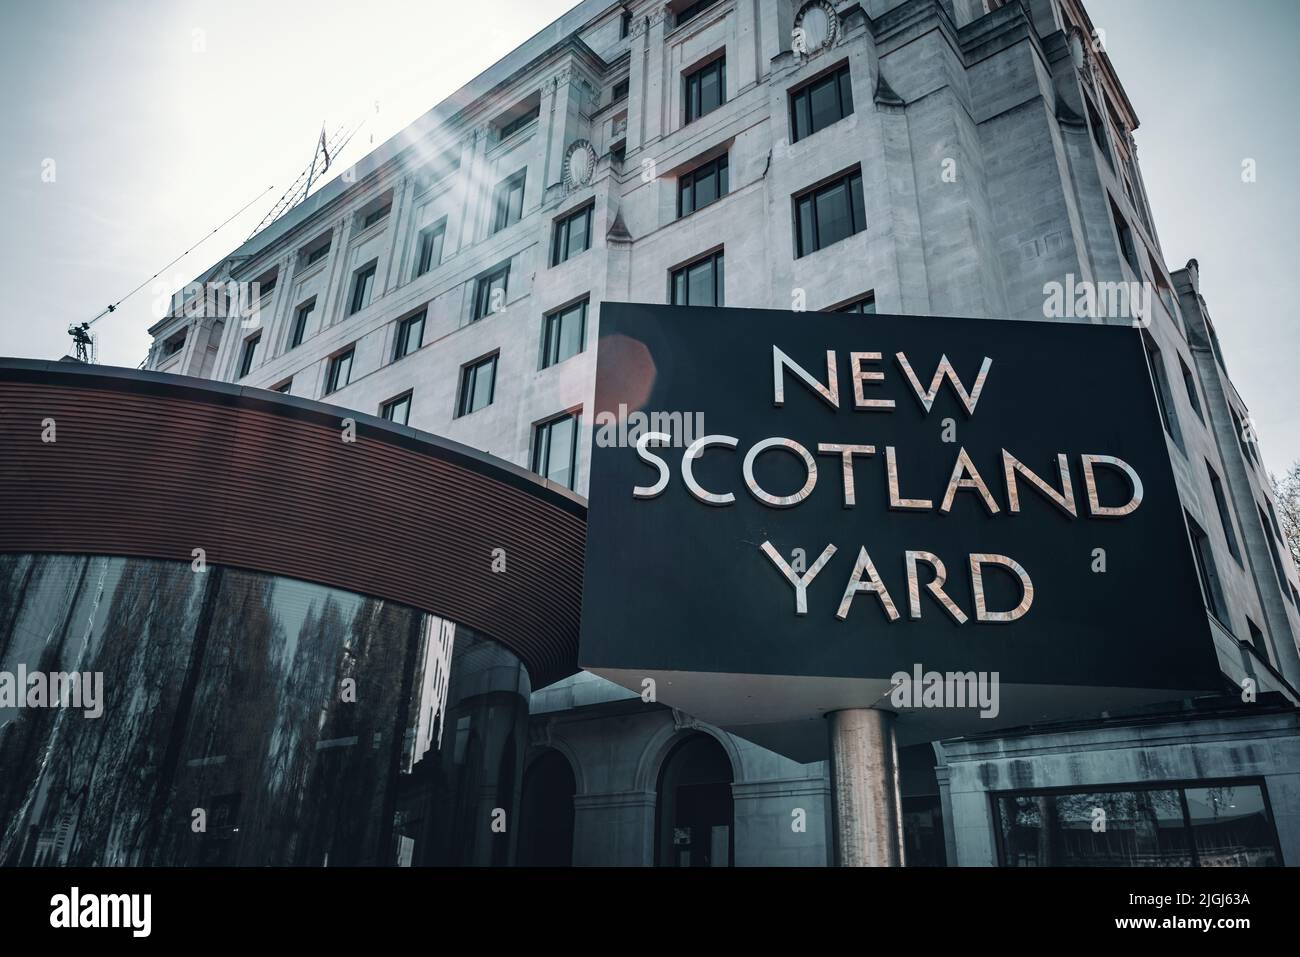 London, UK - 16th April 2022: New Scotland Yard with the iconic sign outside, London UK. Natural sun flare, retro style  filter applied. Stock Photo